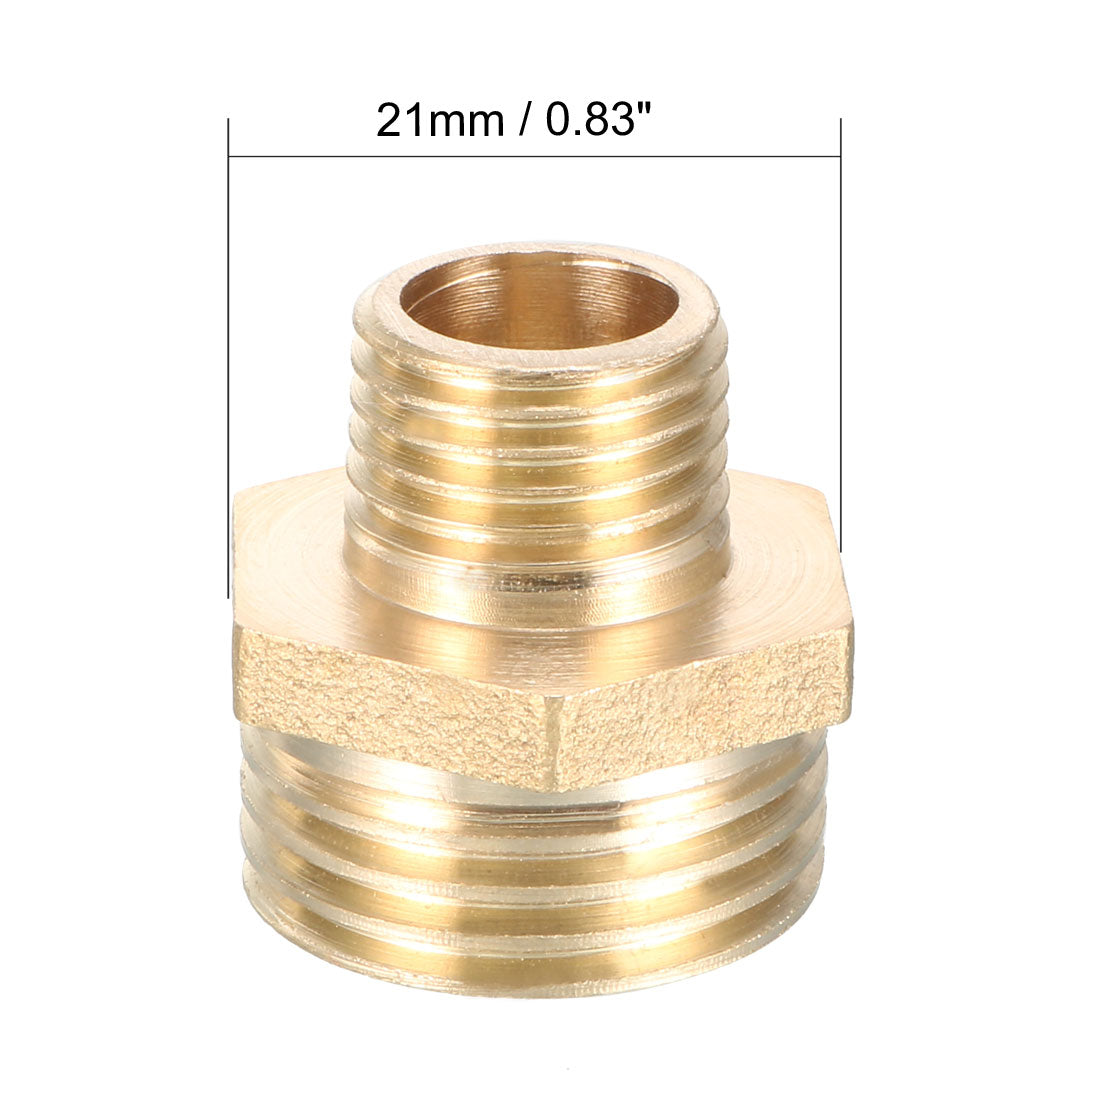 uxcell Uxcell Brass Pipe Fitting Reducing Hex Bushing 1/2 BSP Male x 1/4 BSP Male Adapter